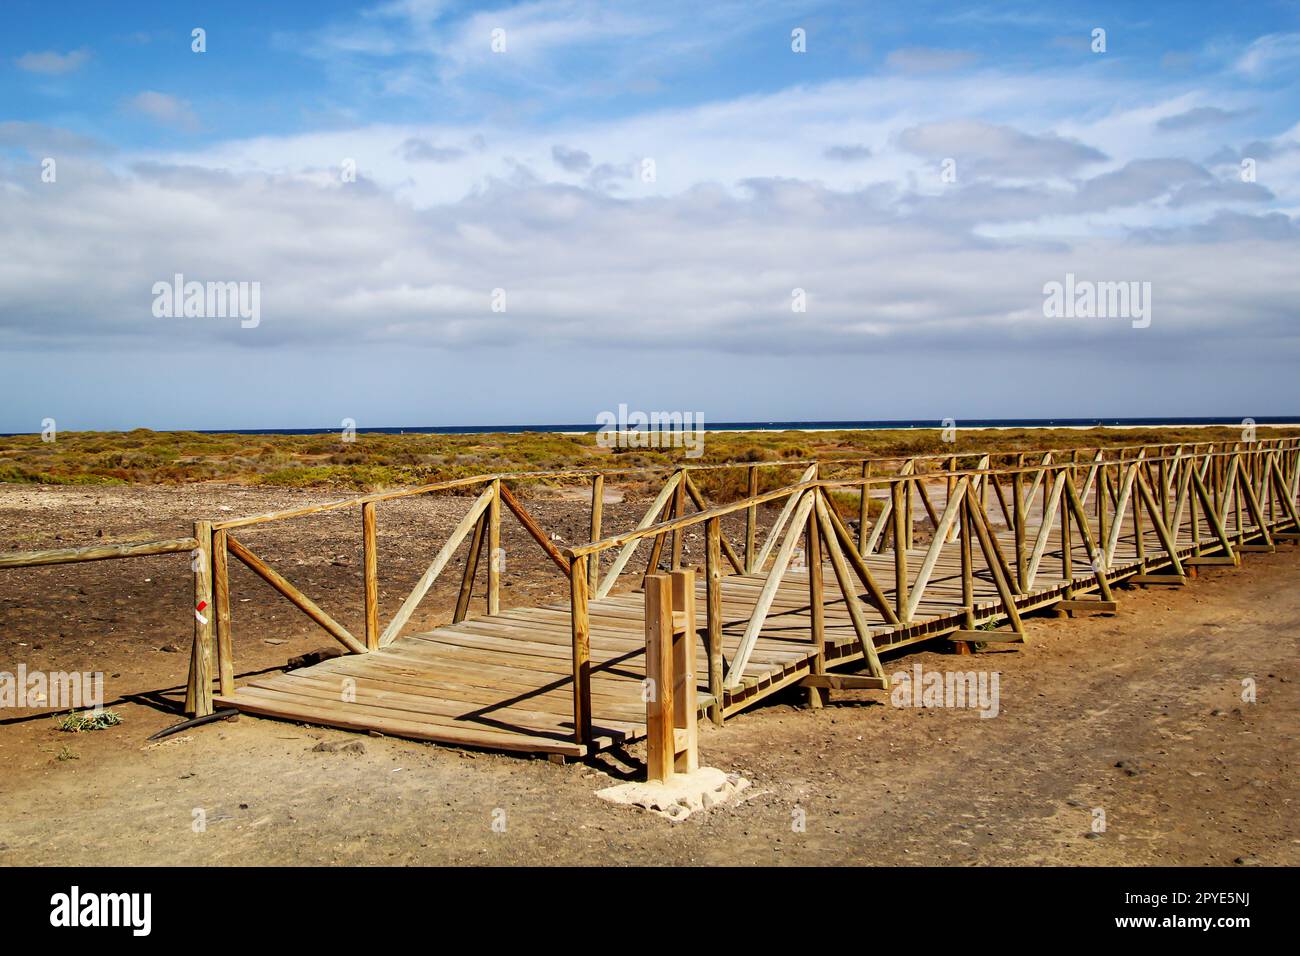 Through a wooden walkway, beachgoers are guided through the nature worth protecting without damaging it. Stock Photo